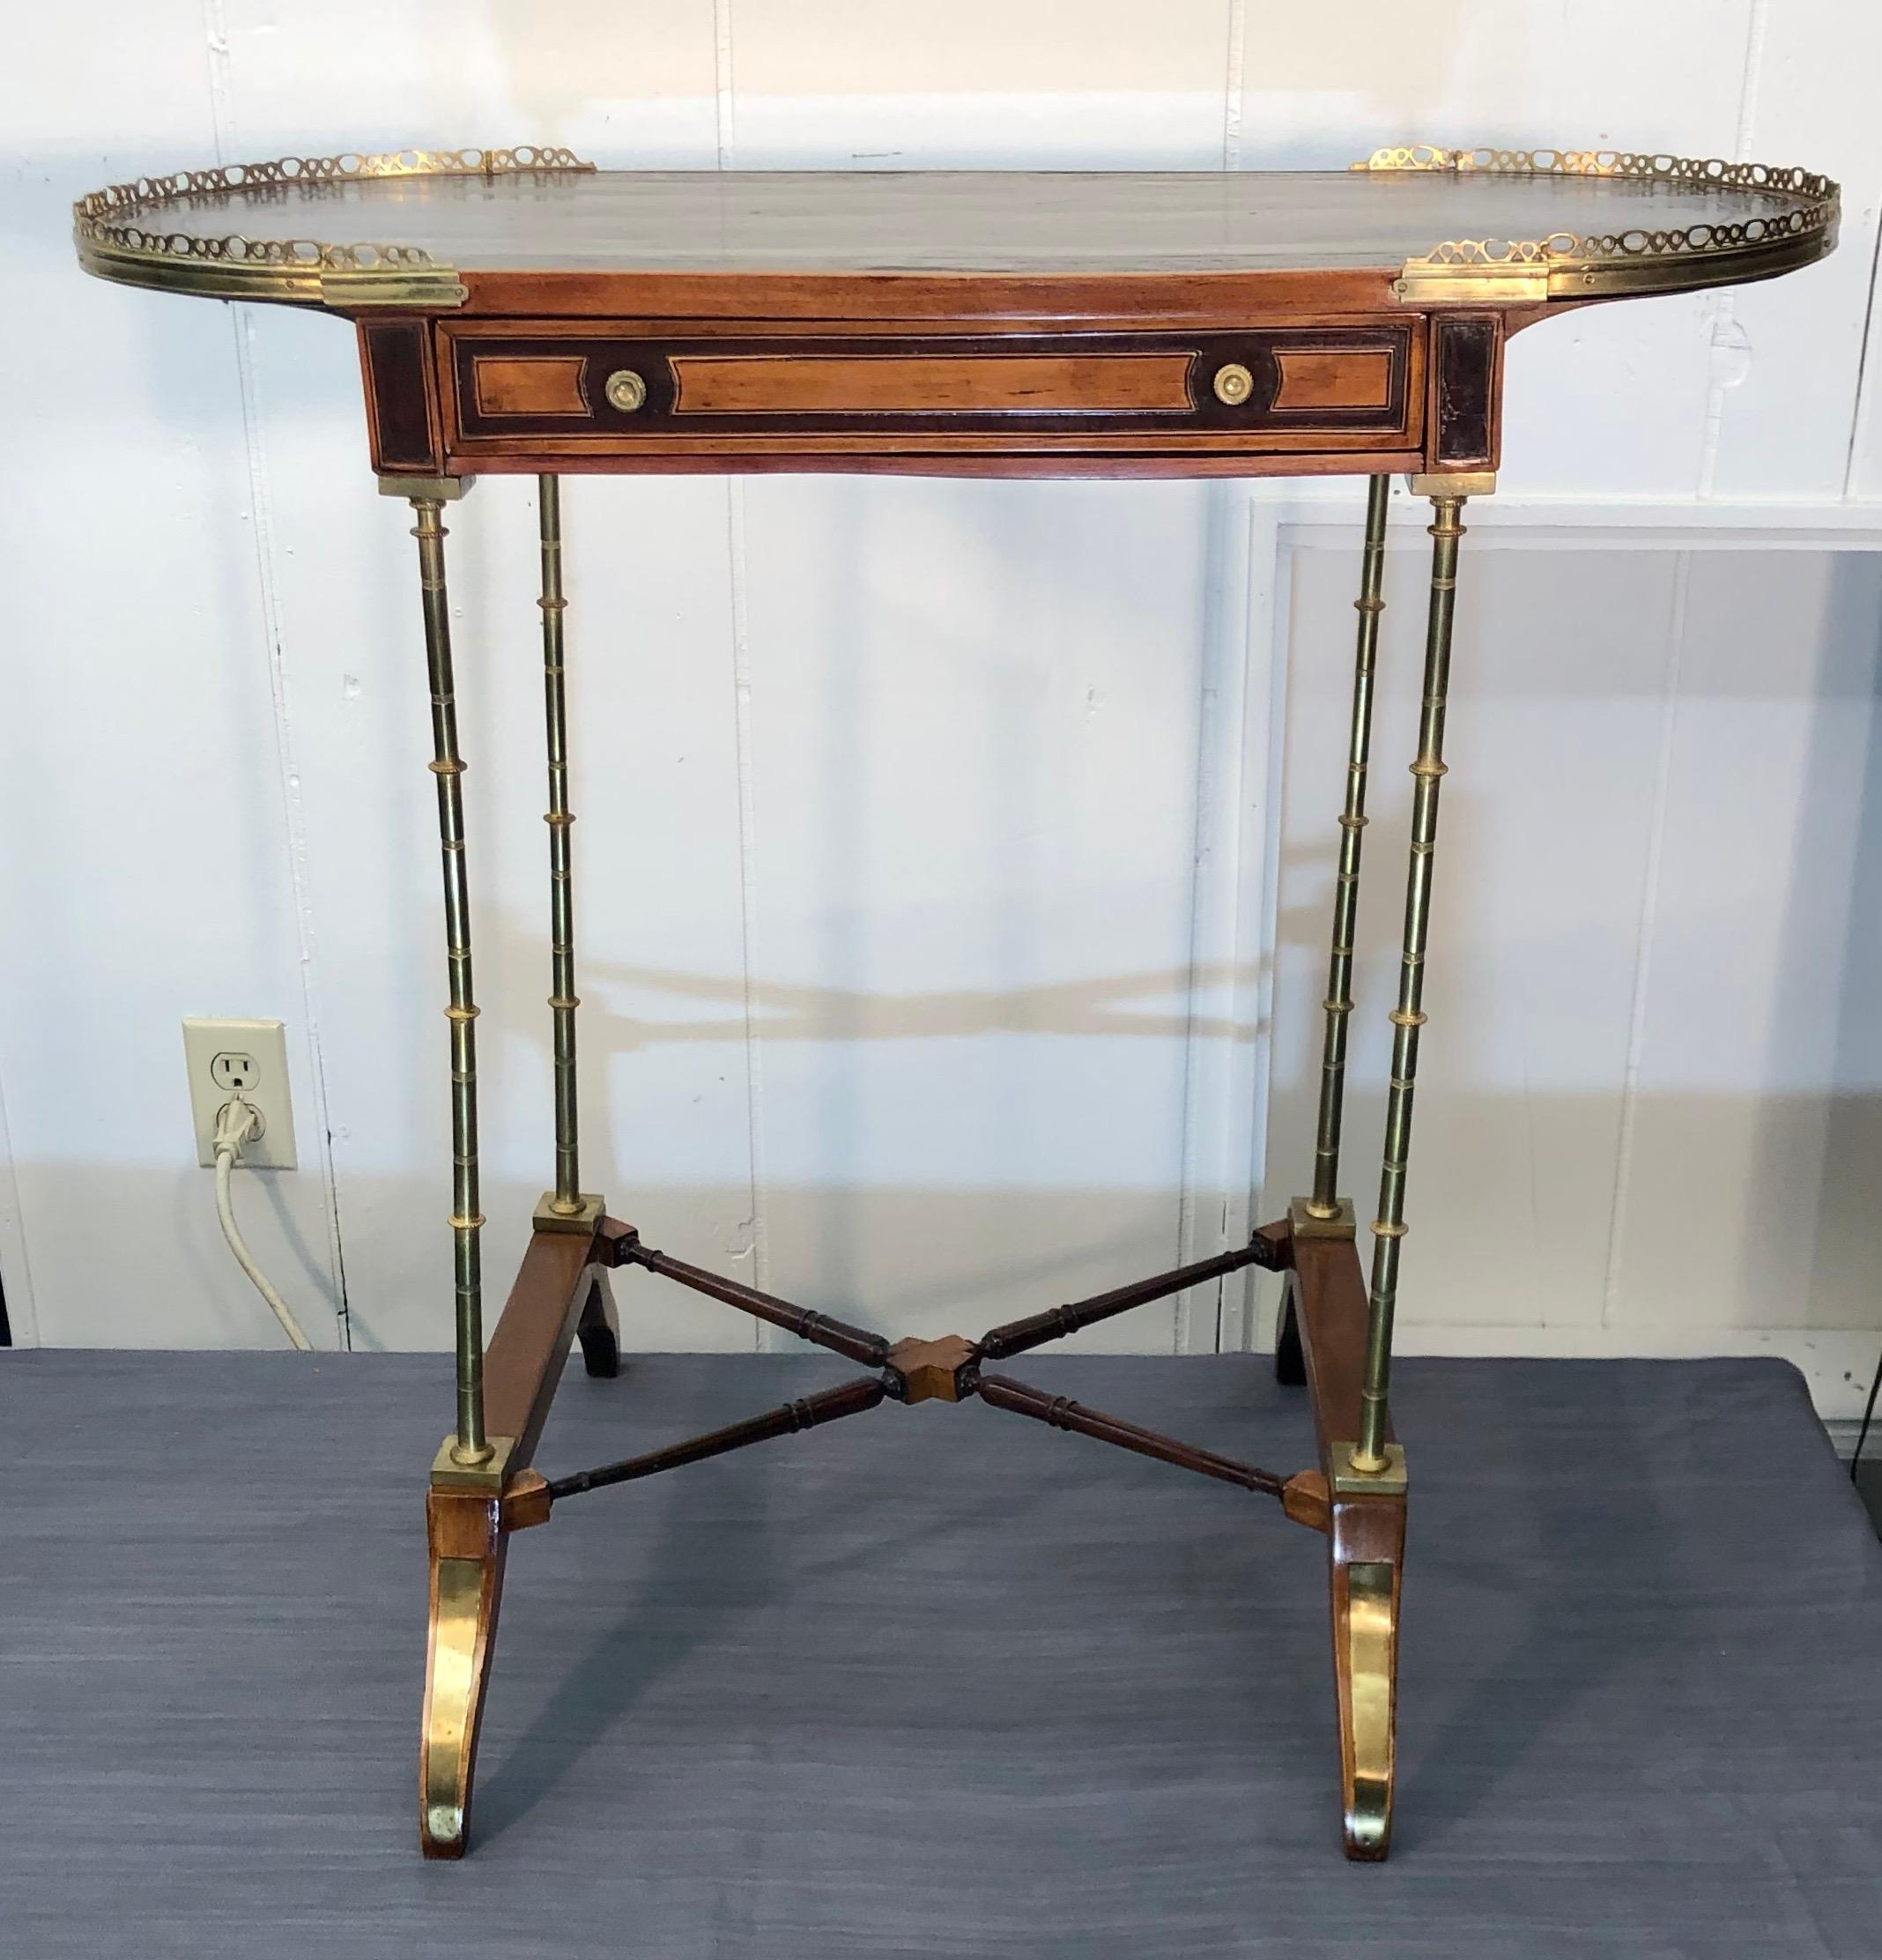 This Neoclassical Table is made by the preeminent maître-ébéniste (master cabinetmaker) Adam Weisweiler (1744 - 1820). The Sophisticated Neoclassical Work Table is finished on both sides with satinwood and mahogany veneers. The writing surface has a